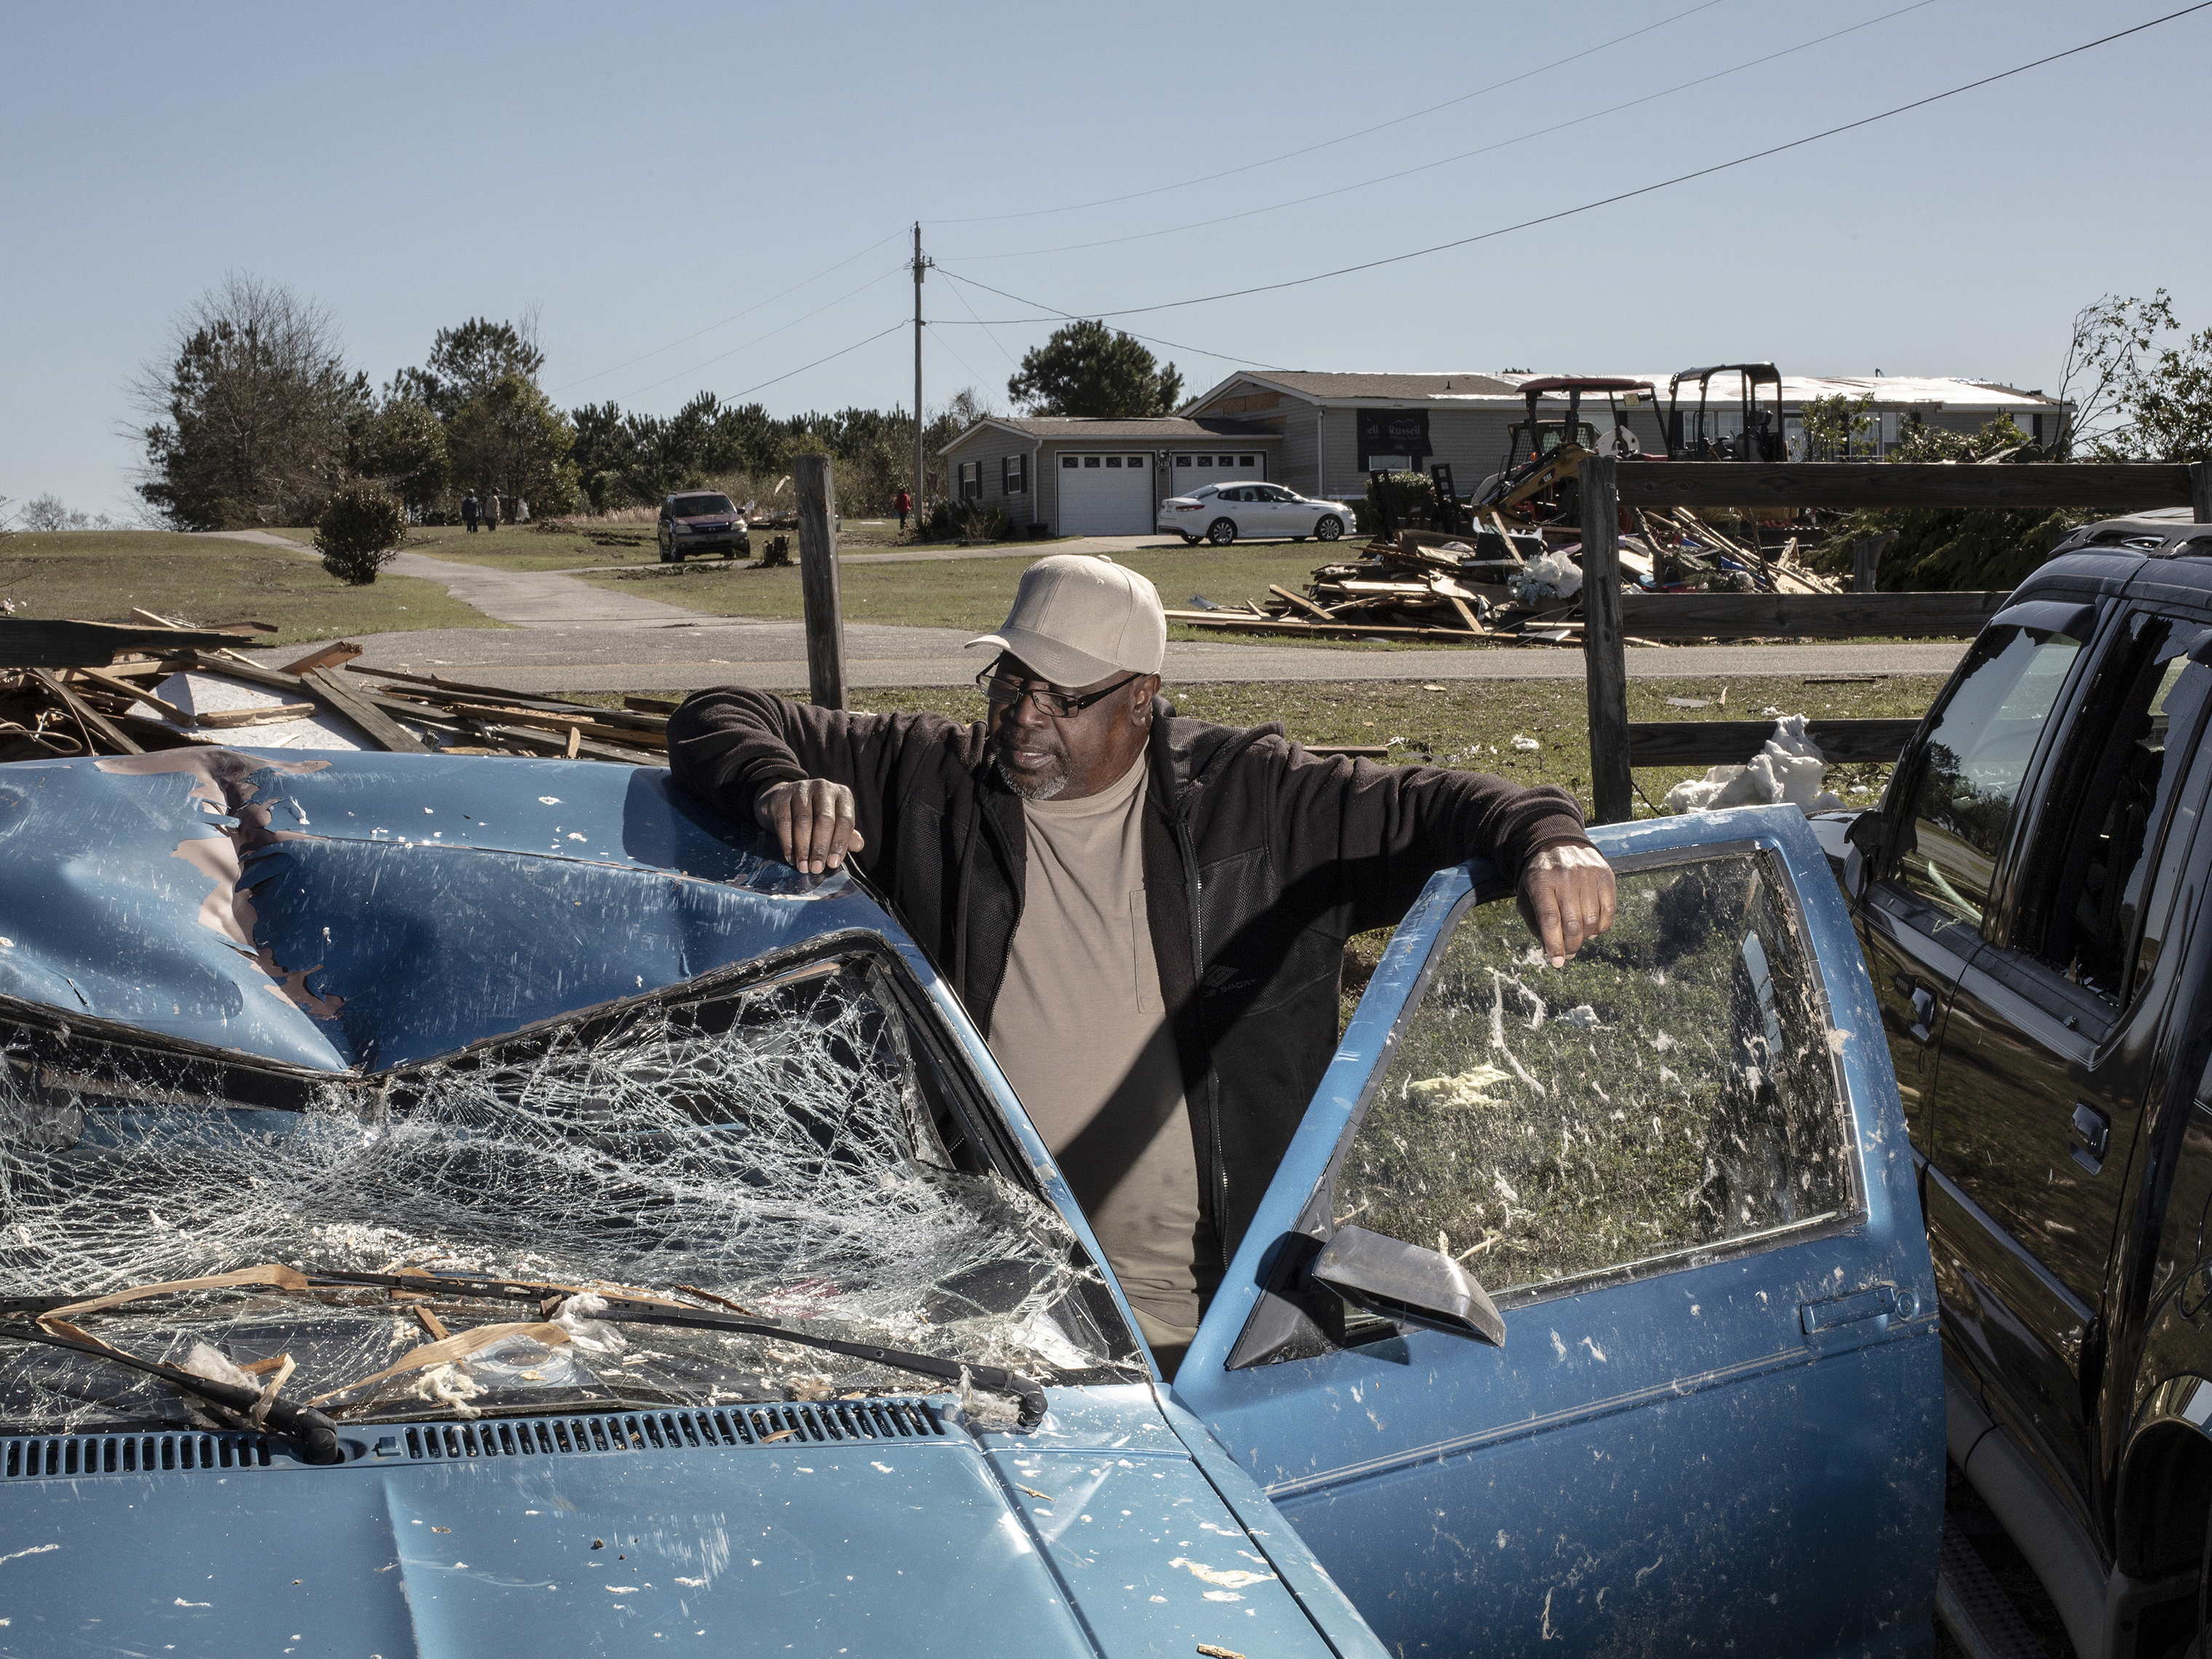 Jimmie Tables poses for a portrait with his truck that was destroyed after a tornado passed over killing several people and destroying homes in Beauregard, Alabama on March 4, 2019. (Bryan Anselm—Redux for TIME)